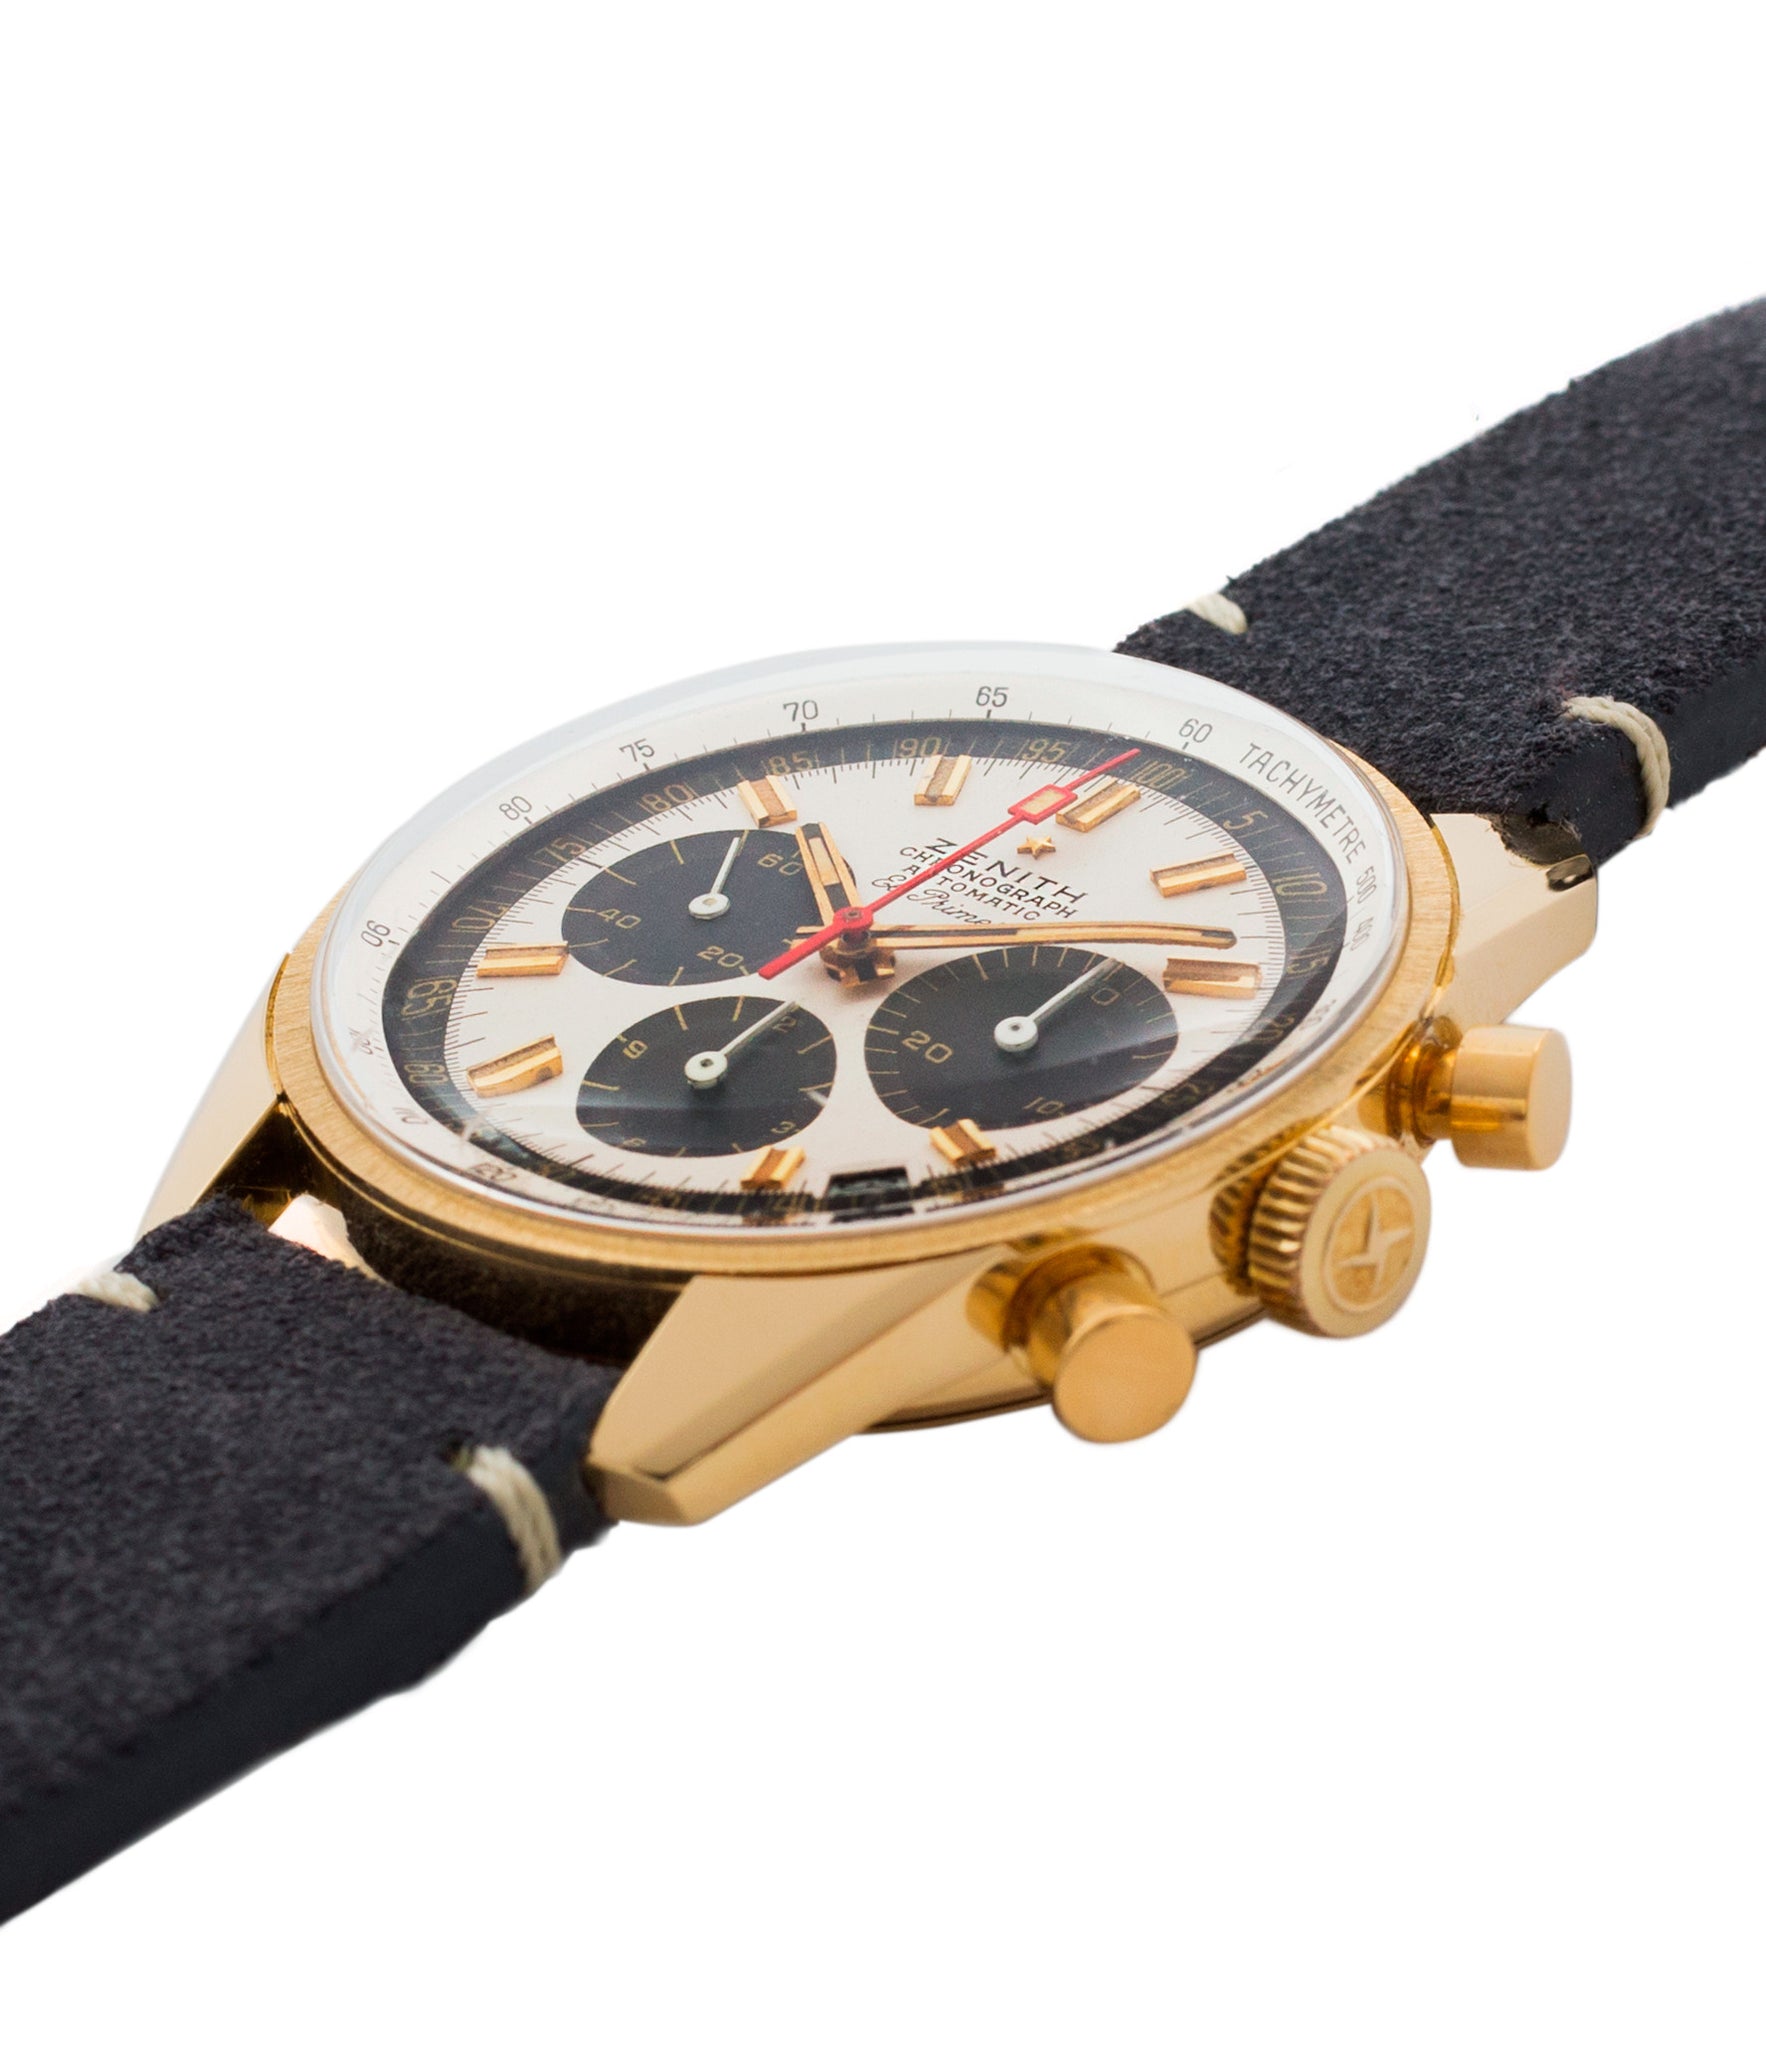 selling Zenith El Primero G381 rare yellow gold vintage chronograph date watch for sale online at A Collected Man London vintage watch specialist